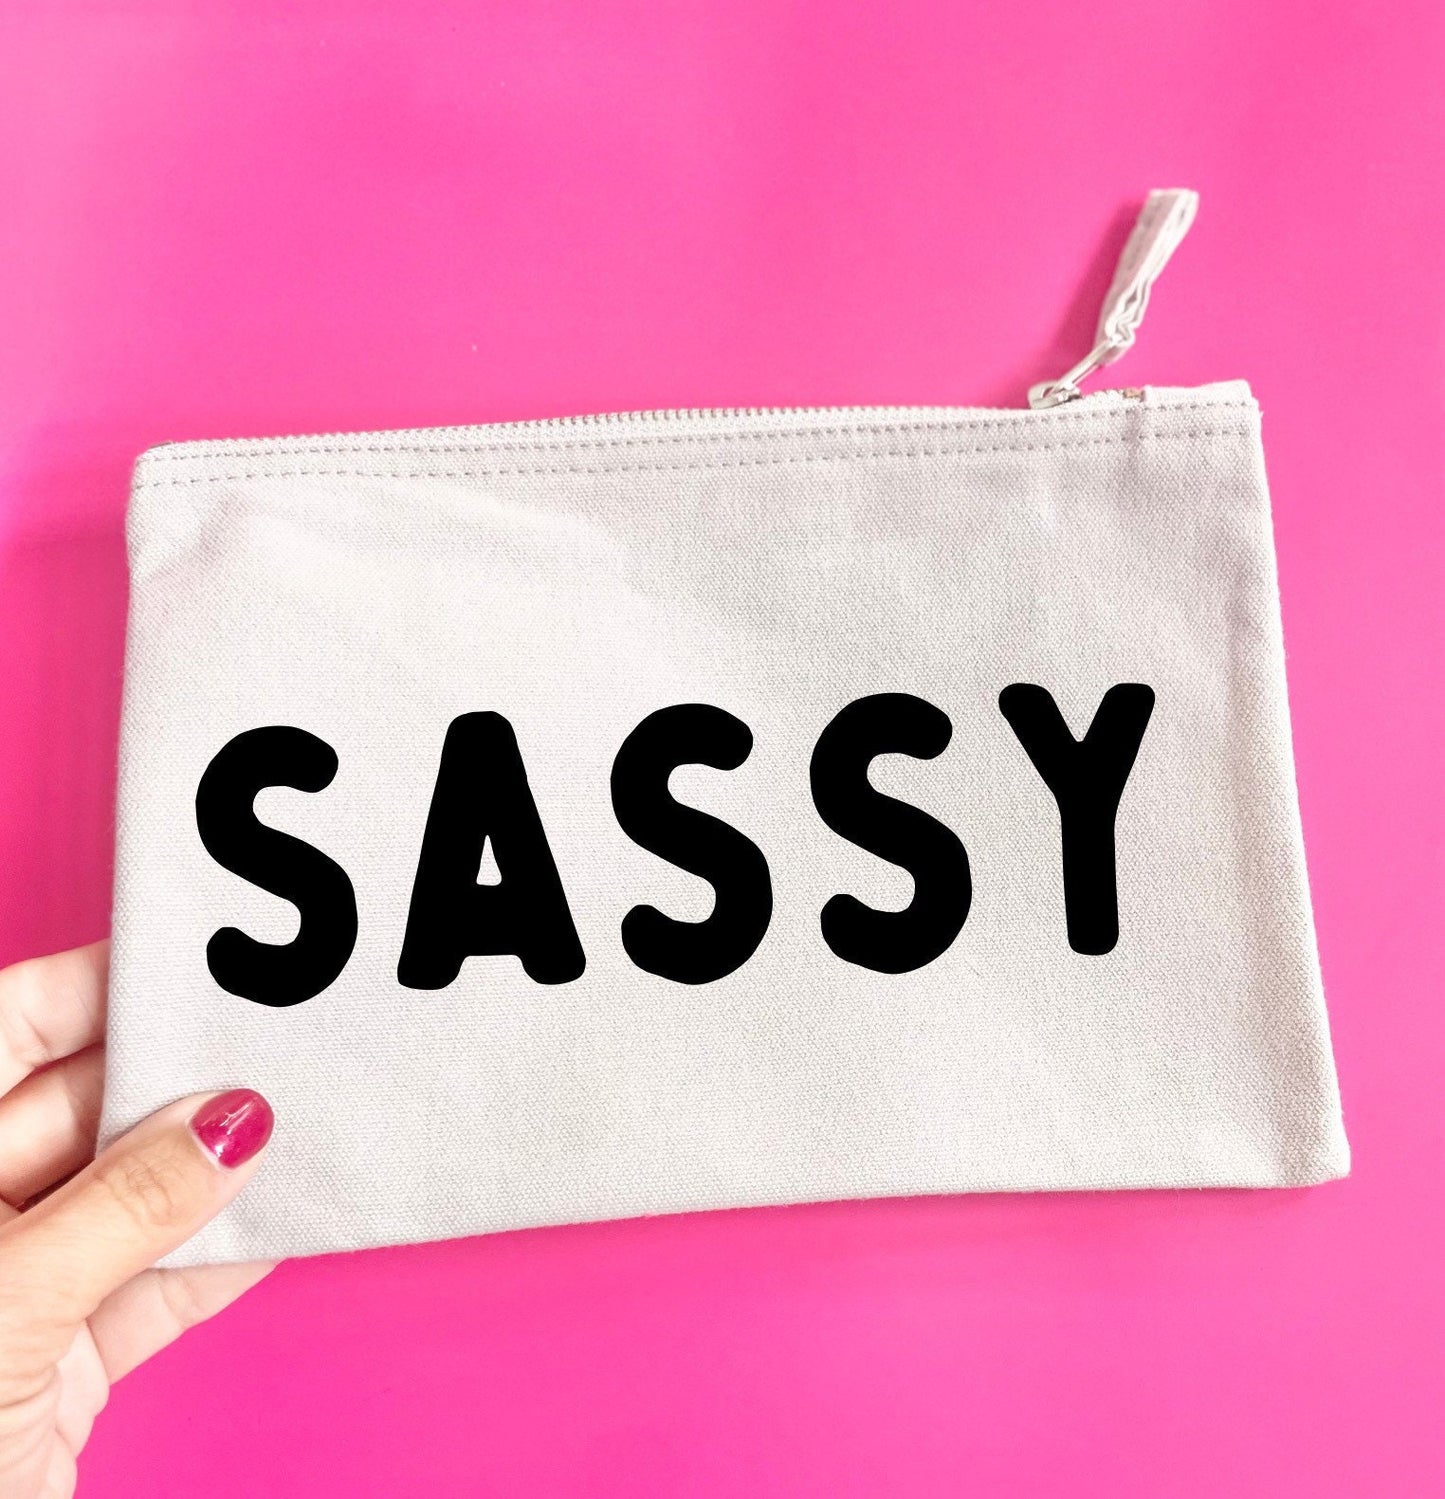 Sassy pouch, Christmas present idea for teenage daughter , granddaughter. Fun make up bags, brush case, lipstick pouch